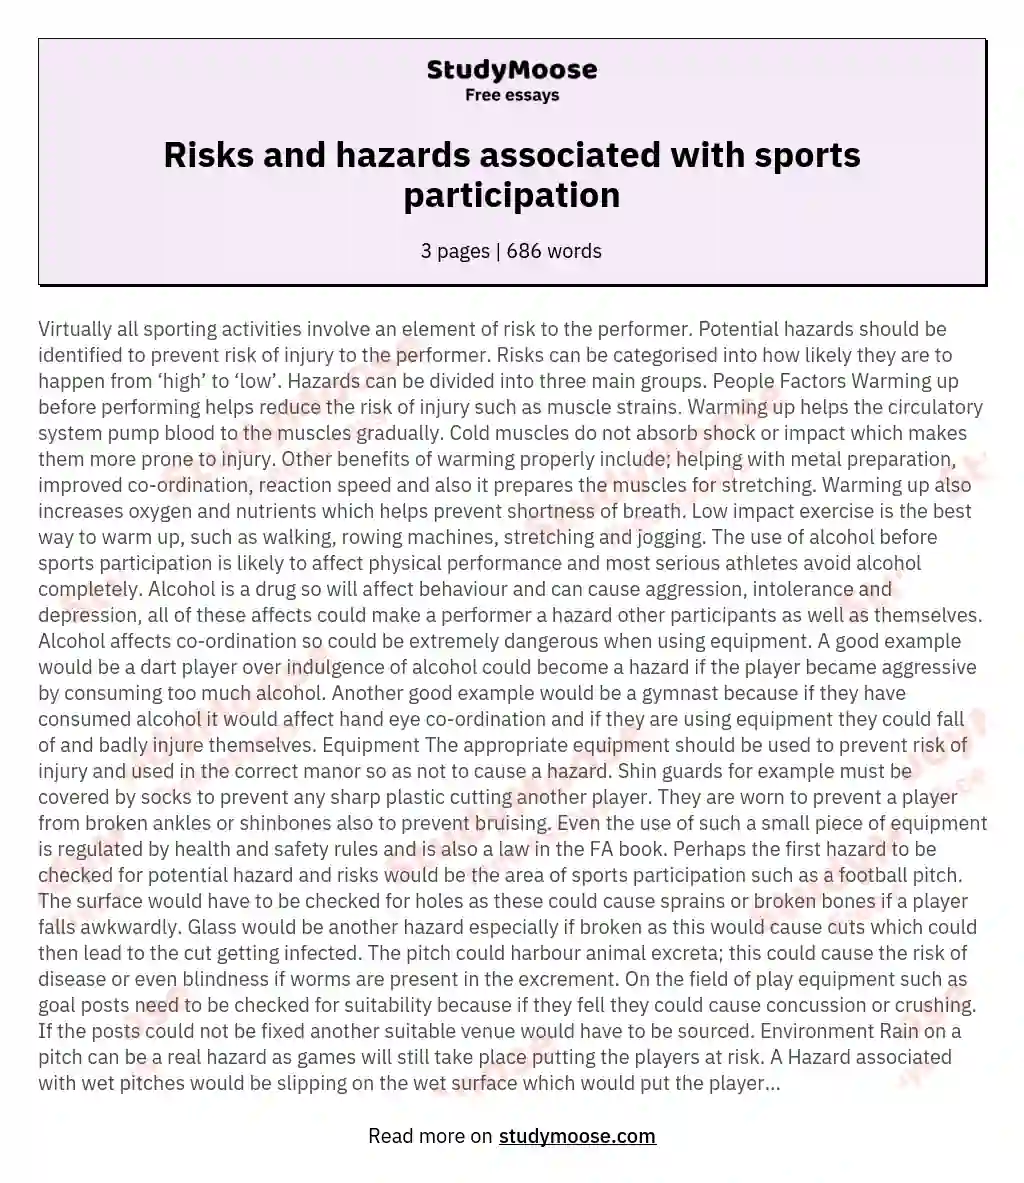 Risks and hazards associated with sports participation